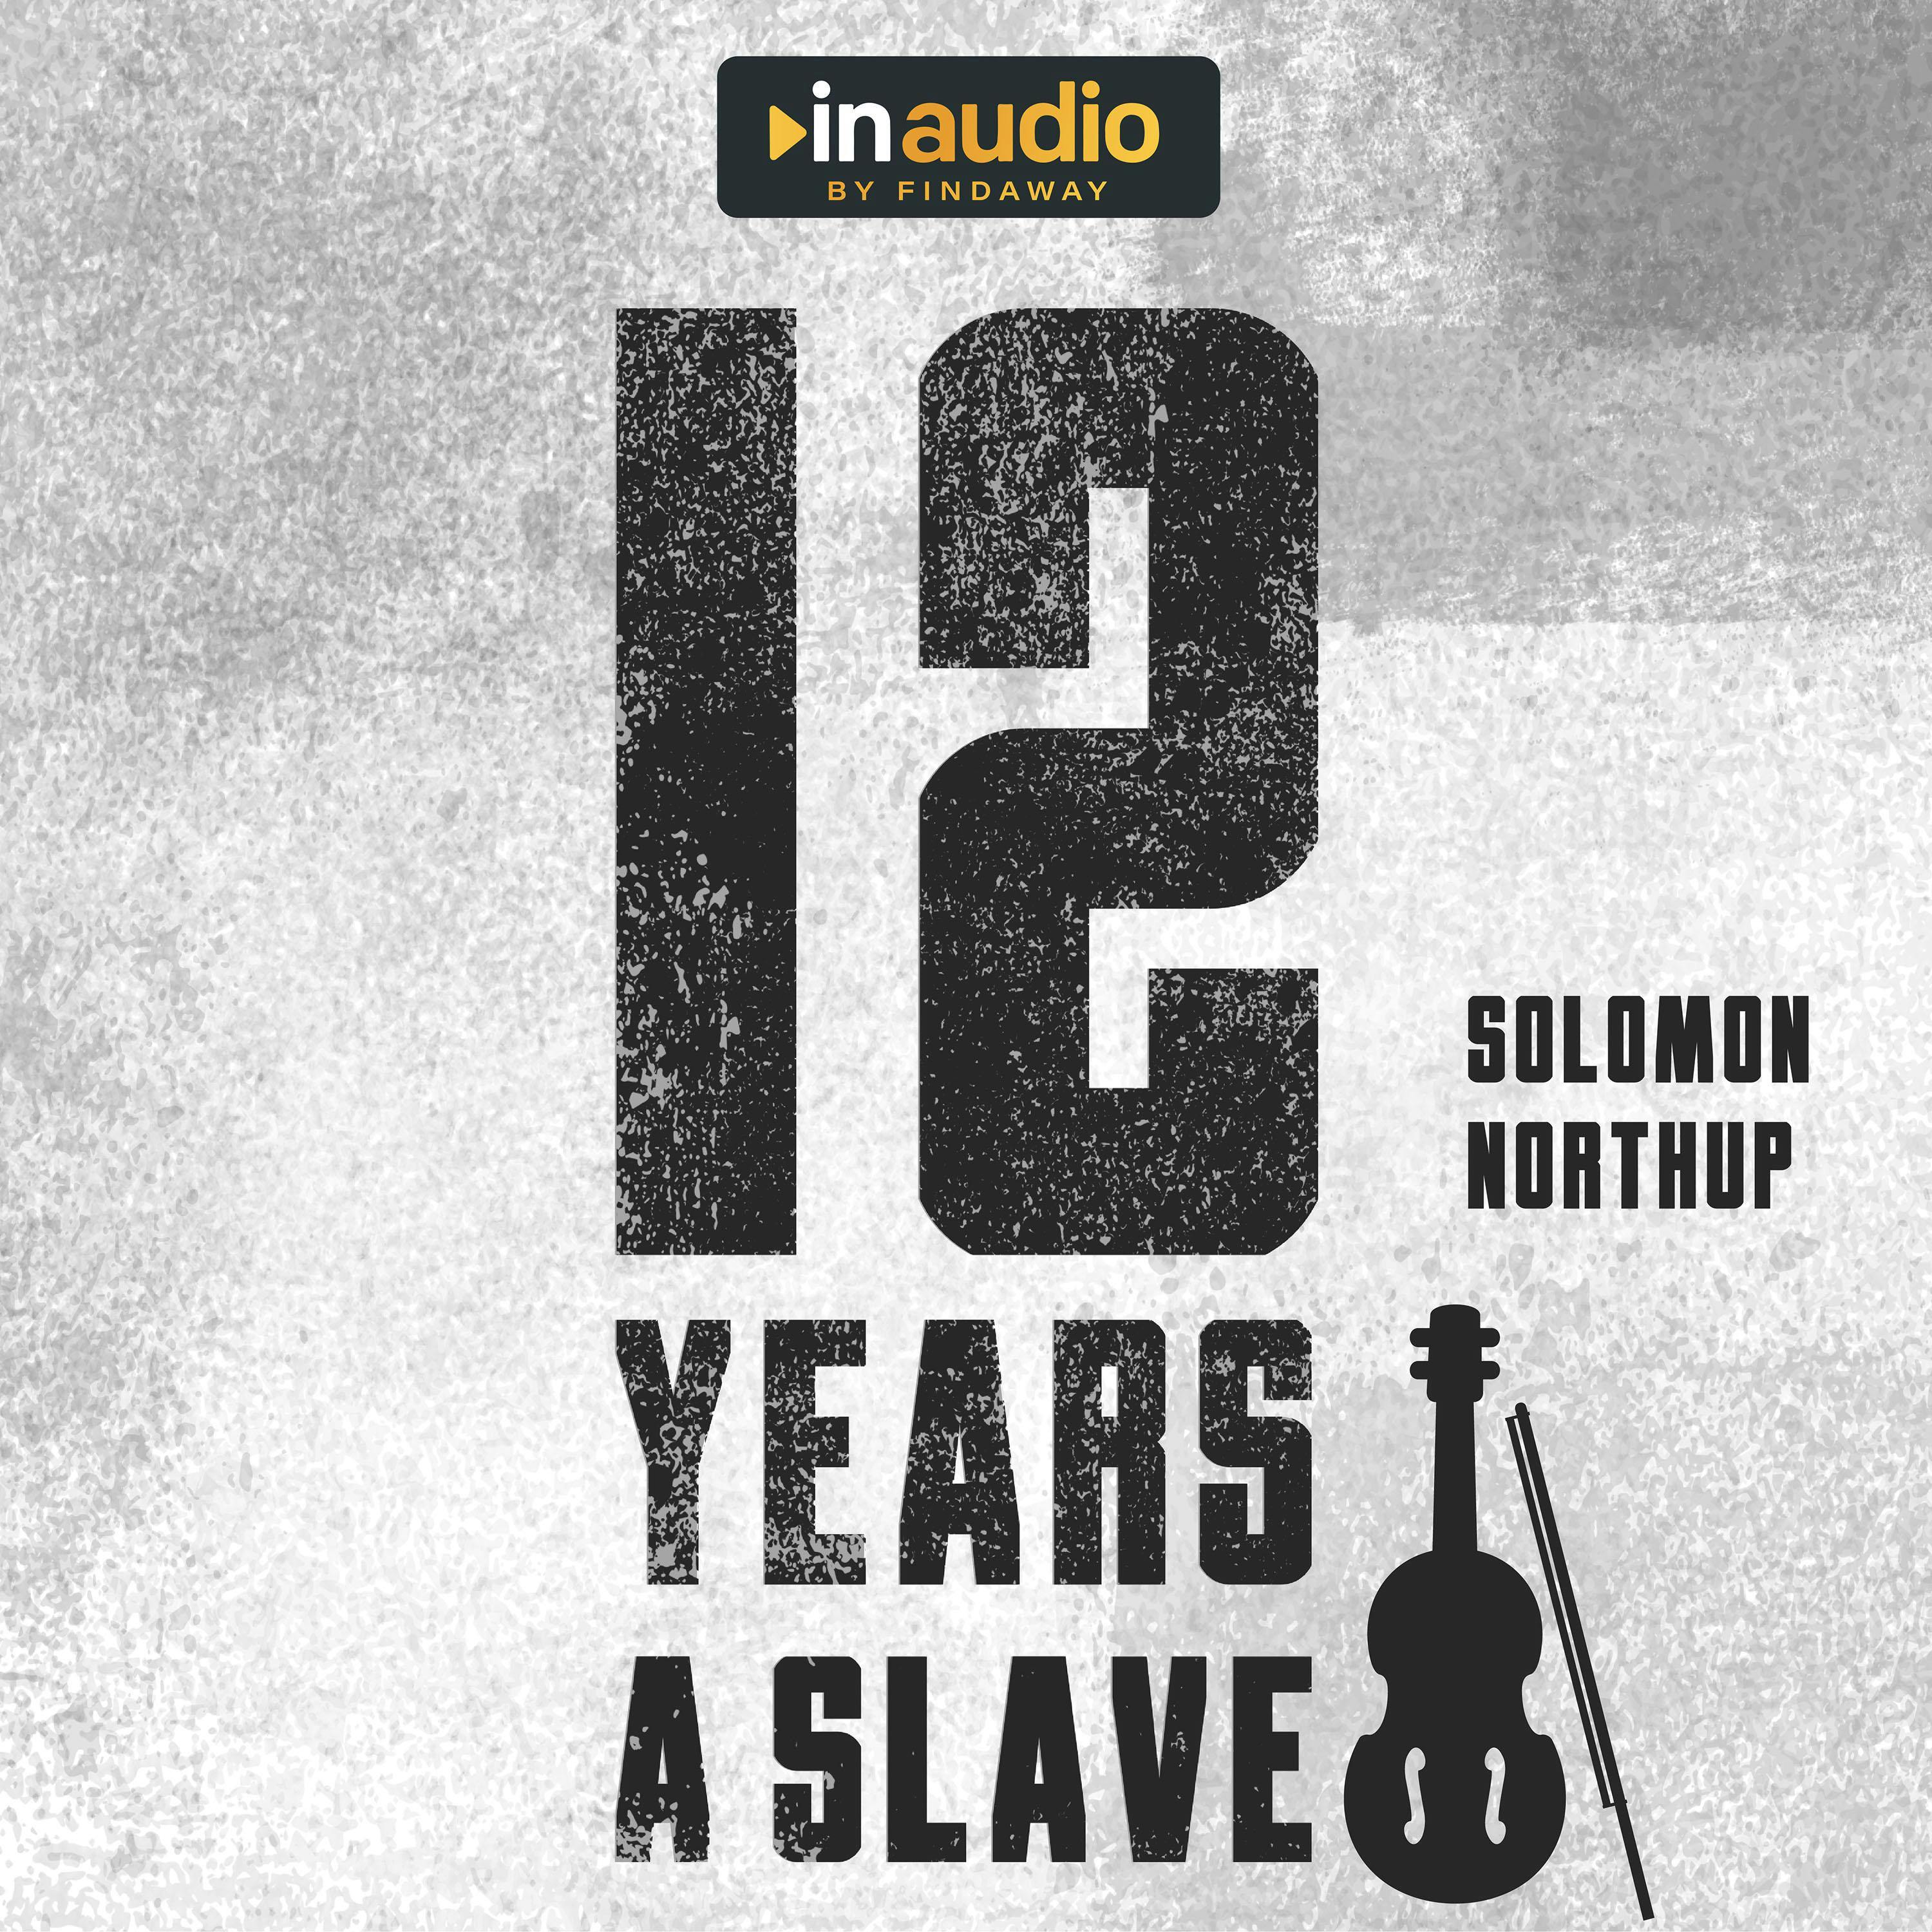 12 Years a Slave - undefined